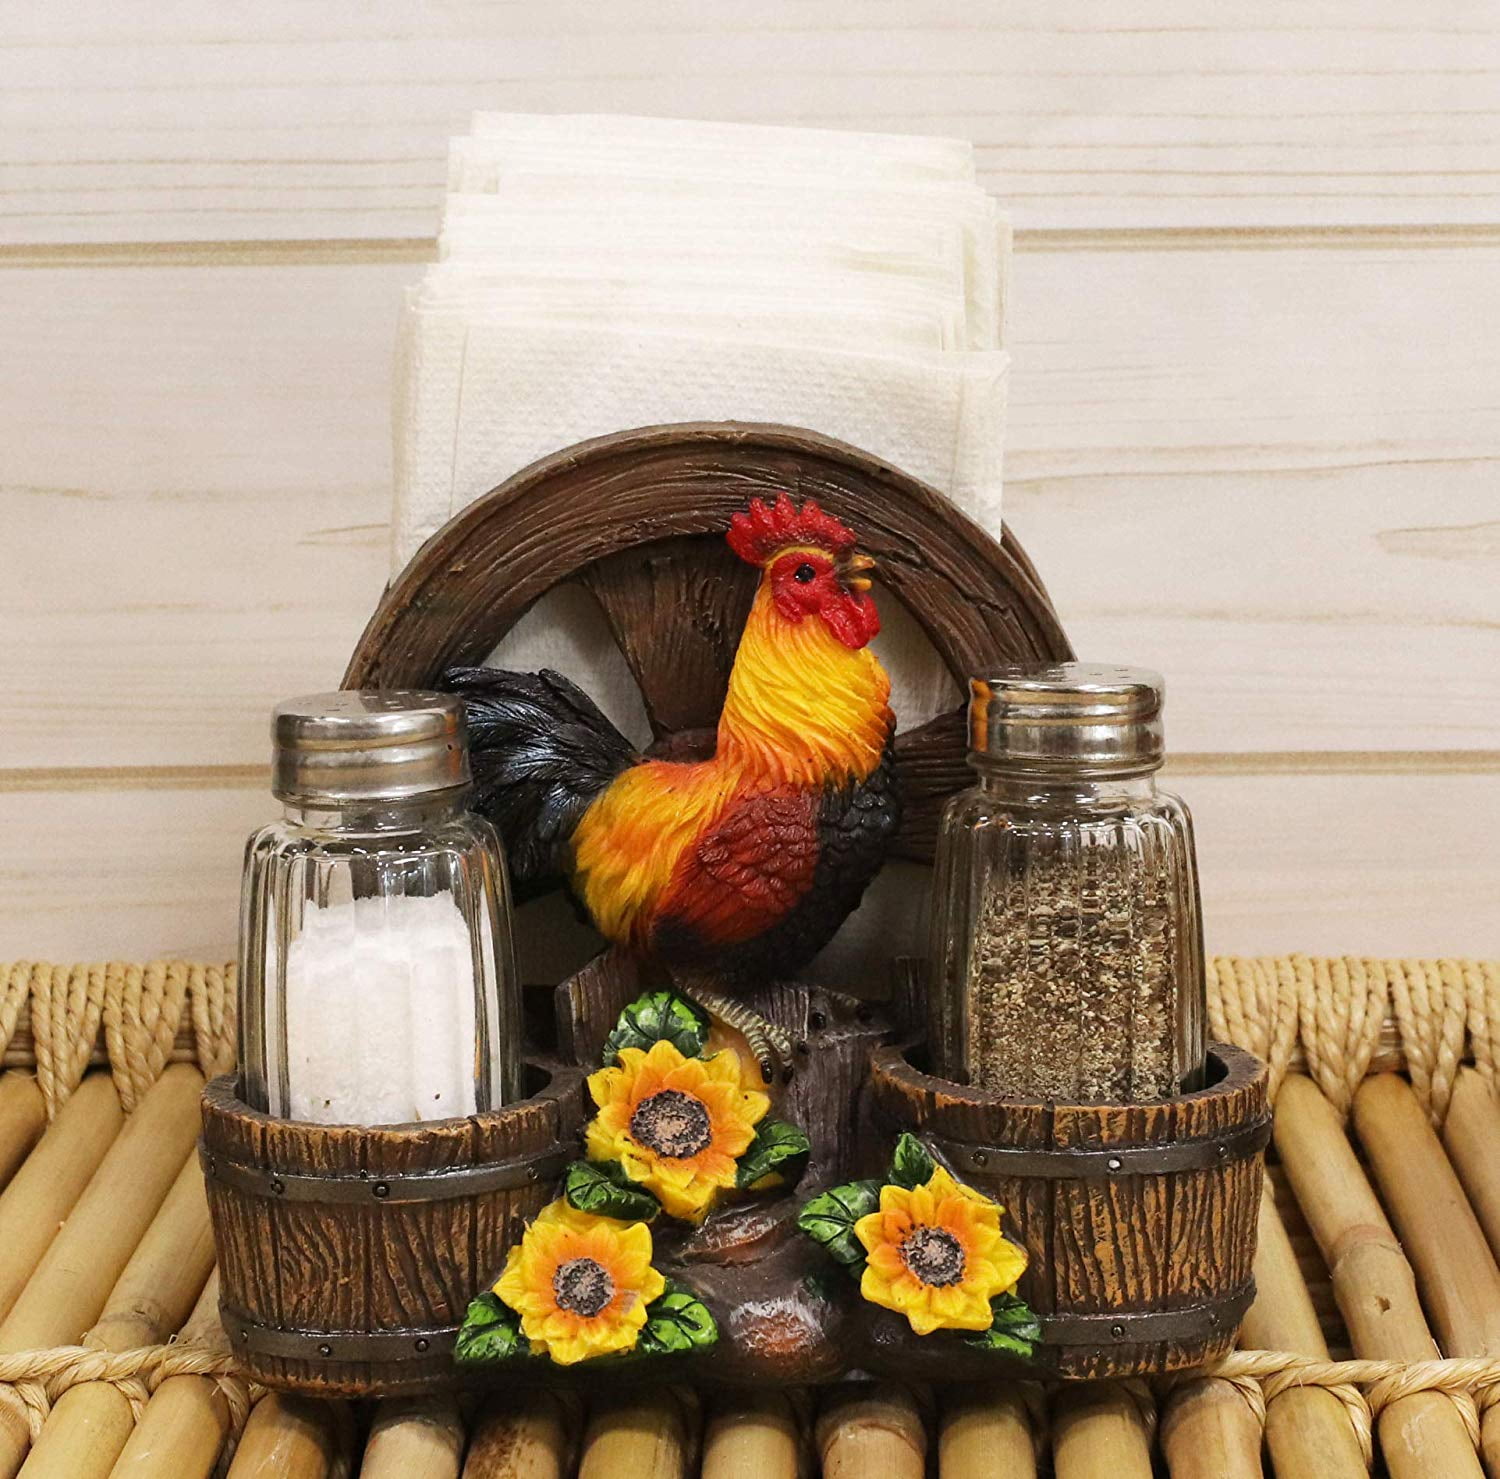 Chicken & Chicks Sculptures and Gifts for Farmers by Home-n-Gifts Rooster and Family Glass Salt and Pepper Shaker Set Figurine for Decorative Farm & Rustic Country Kitchen Decor Hen 